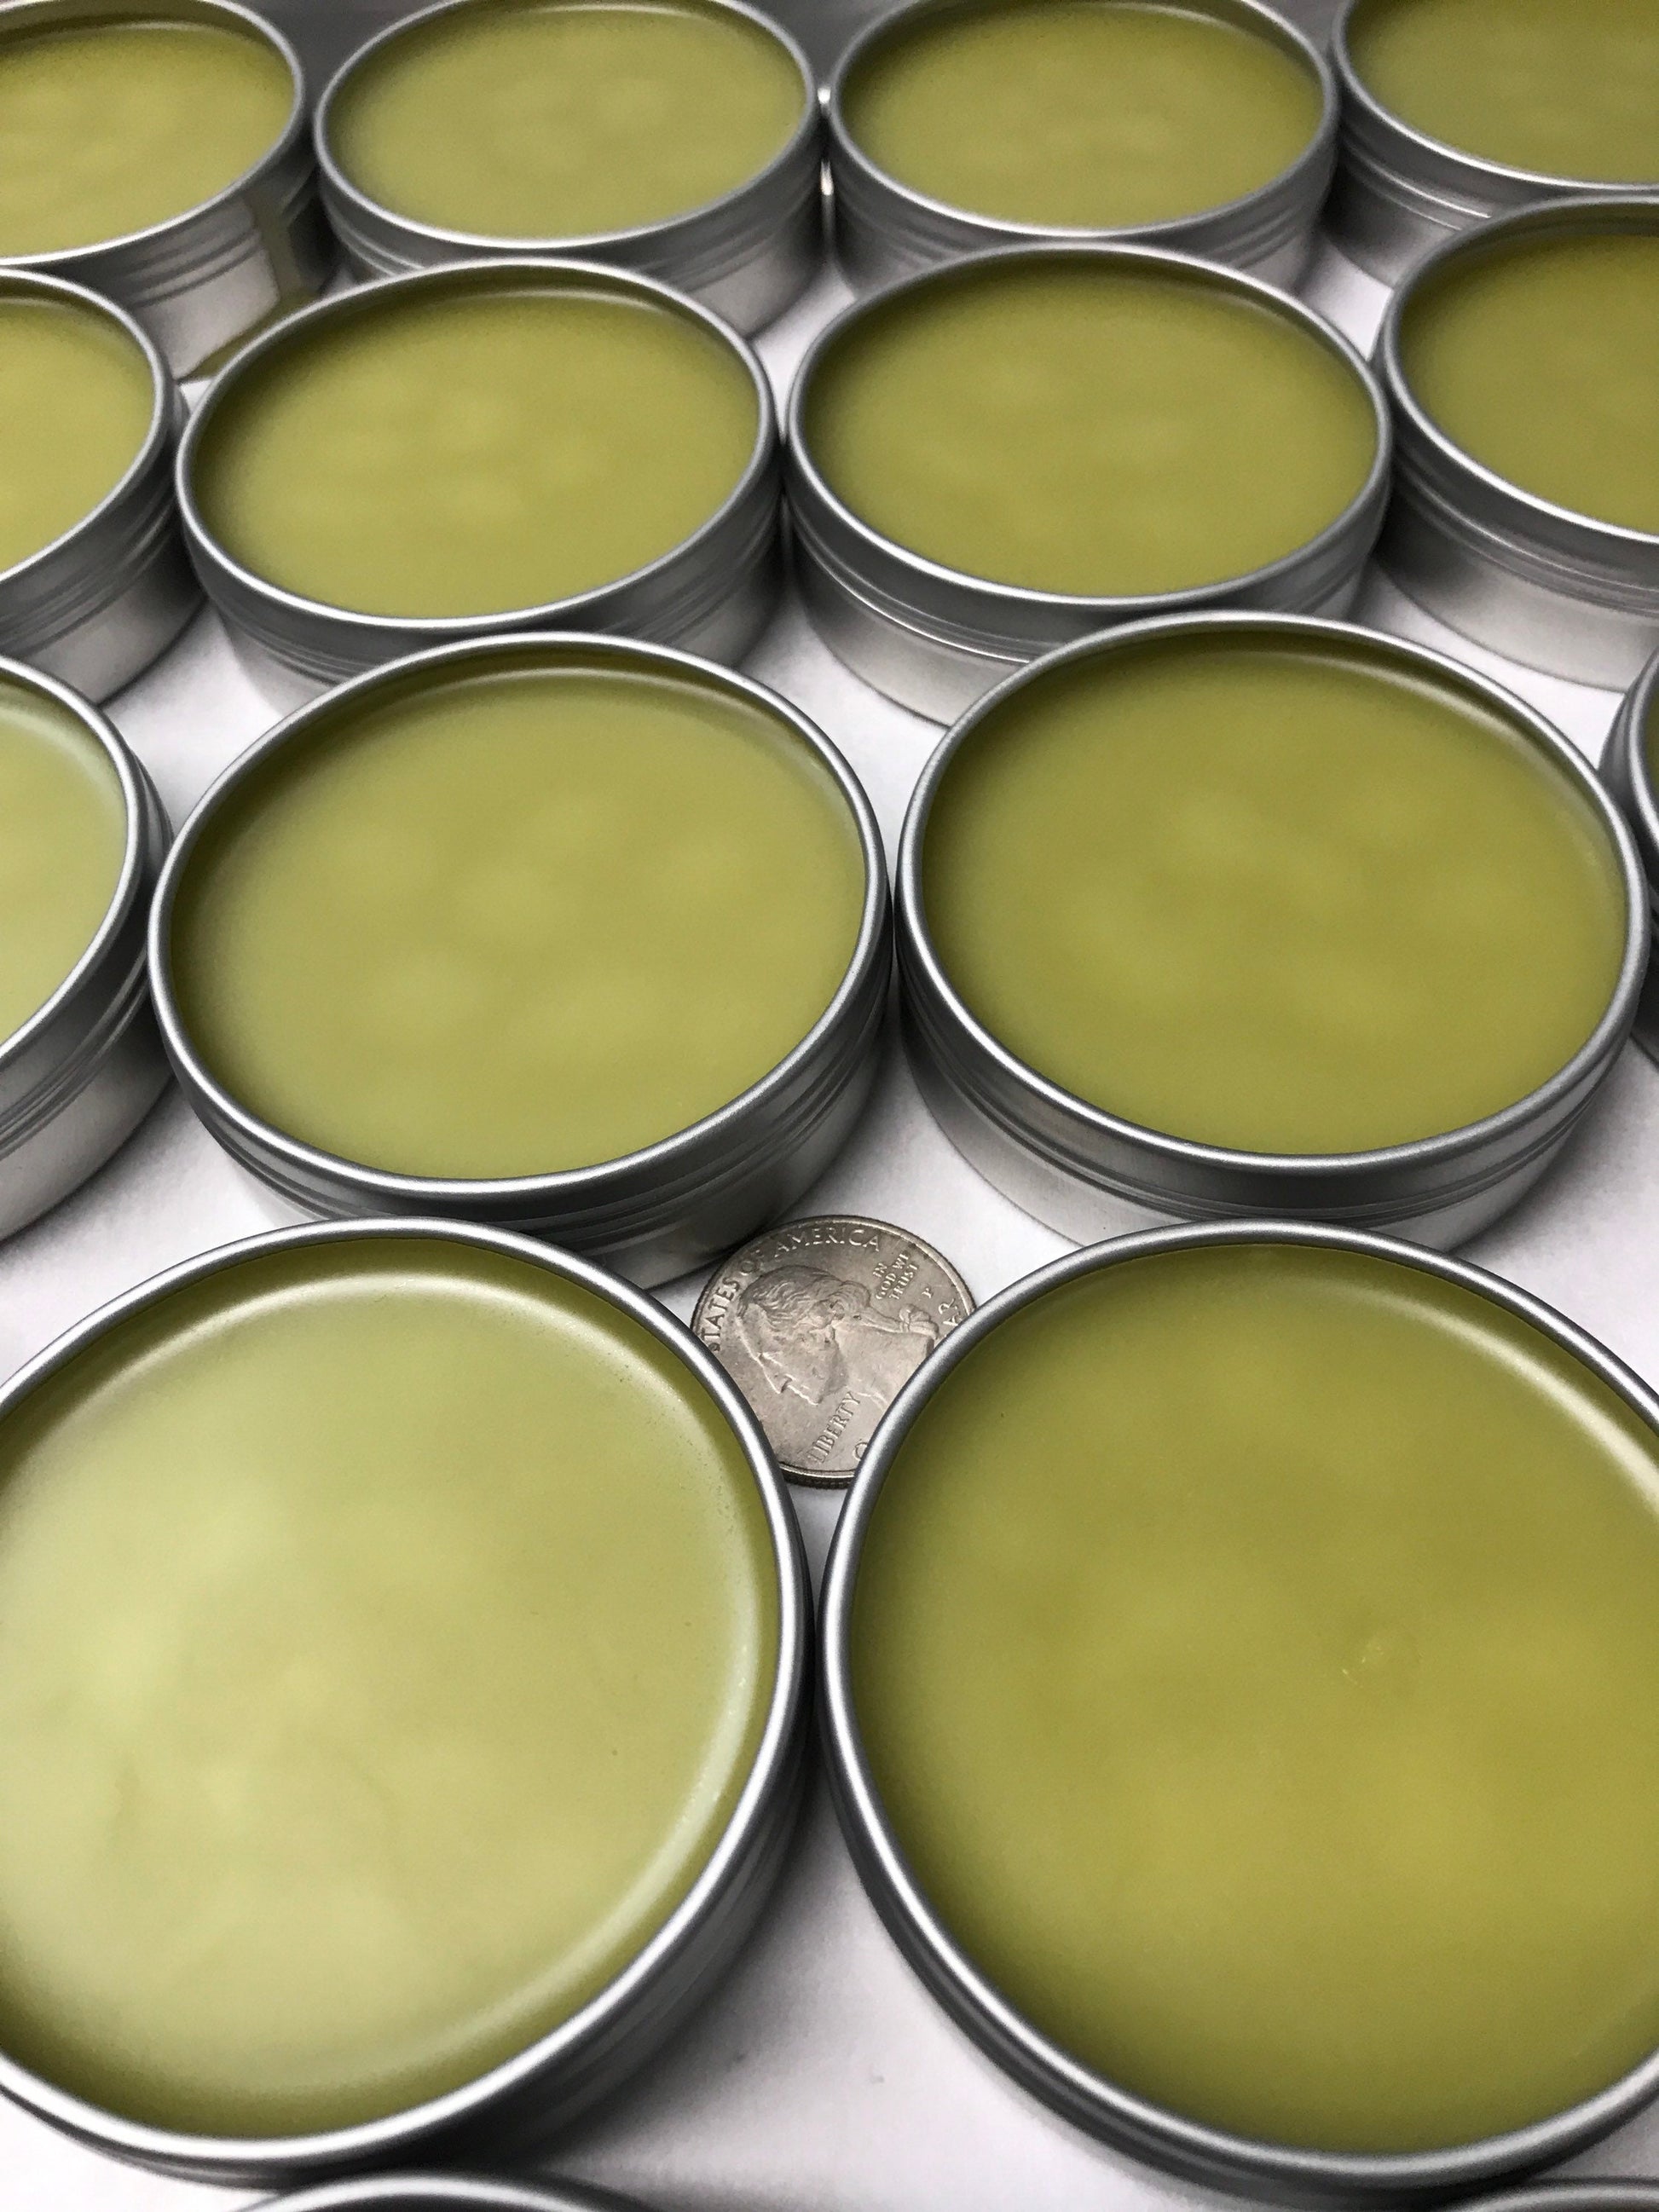 A photo showing a container of Jewelweed and Plantain Salve Balm